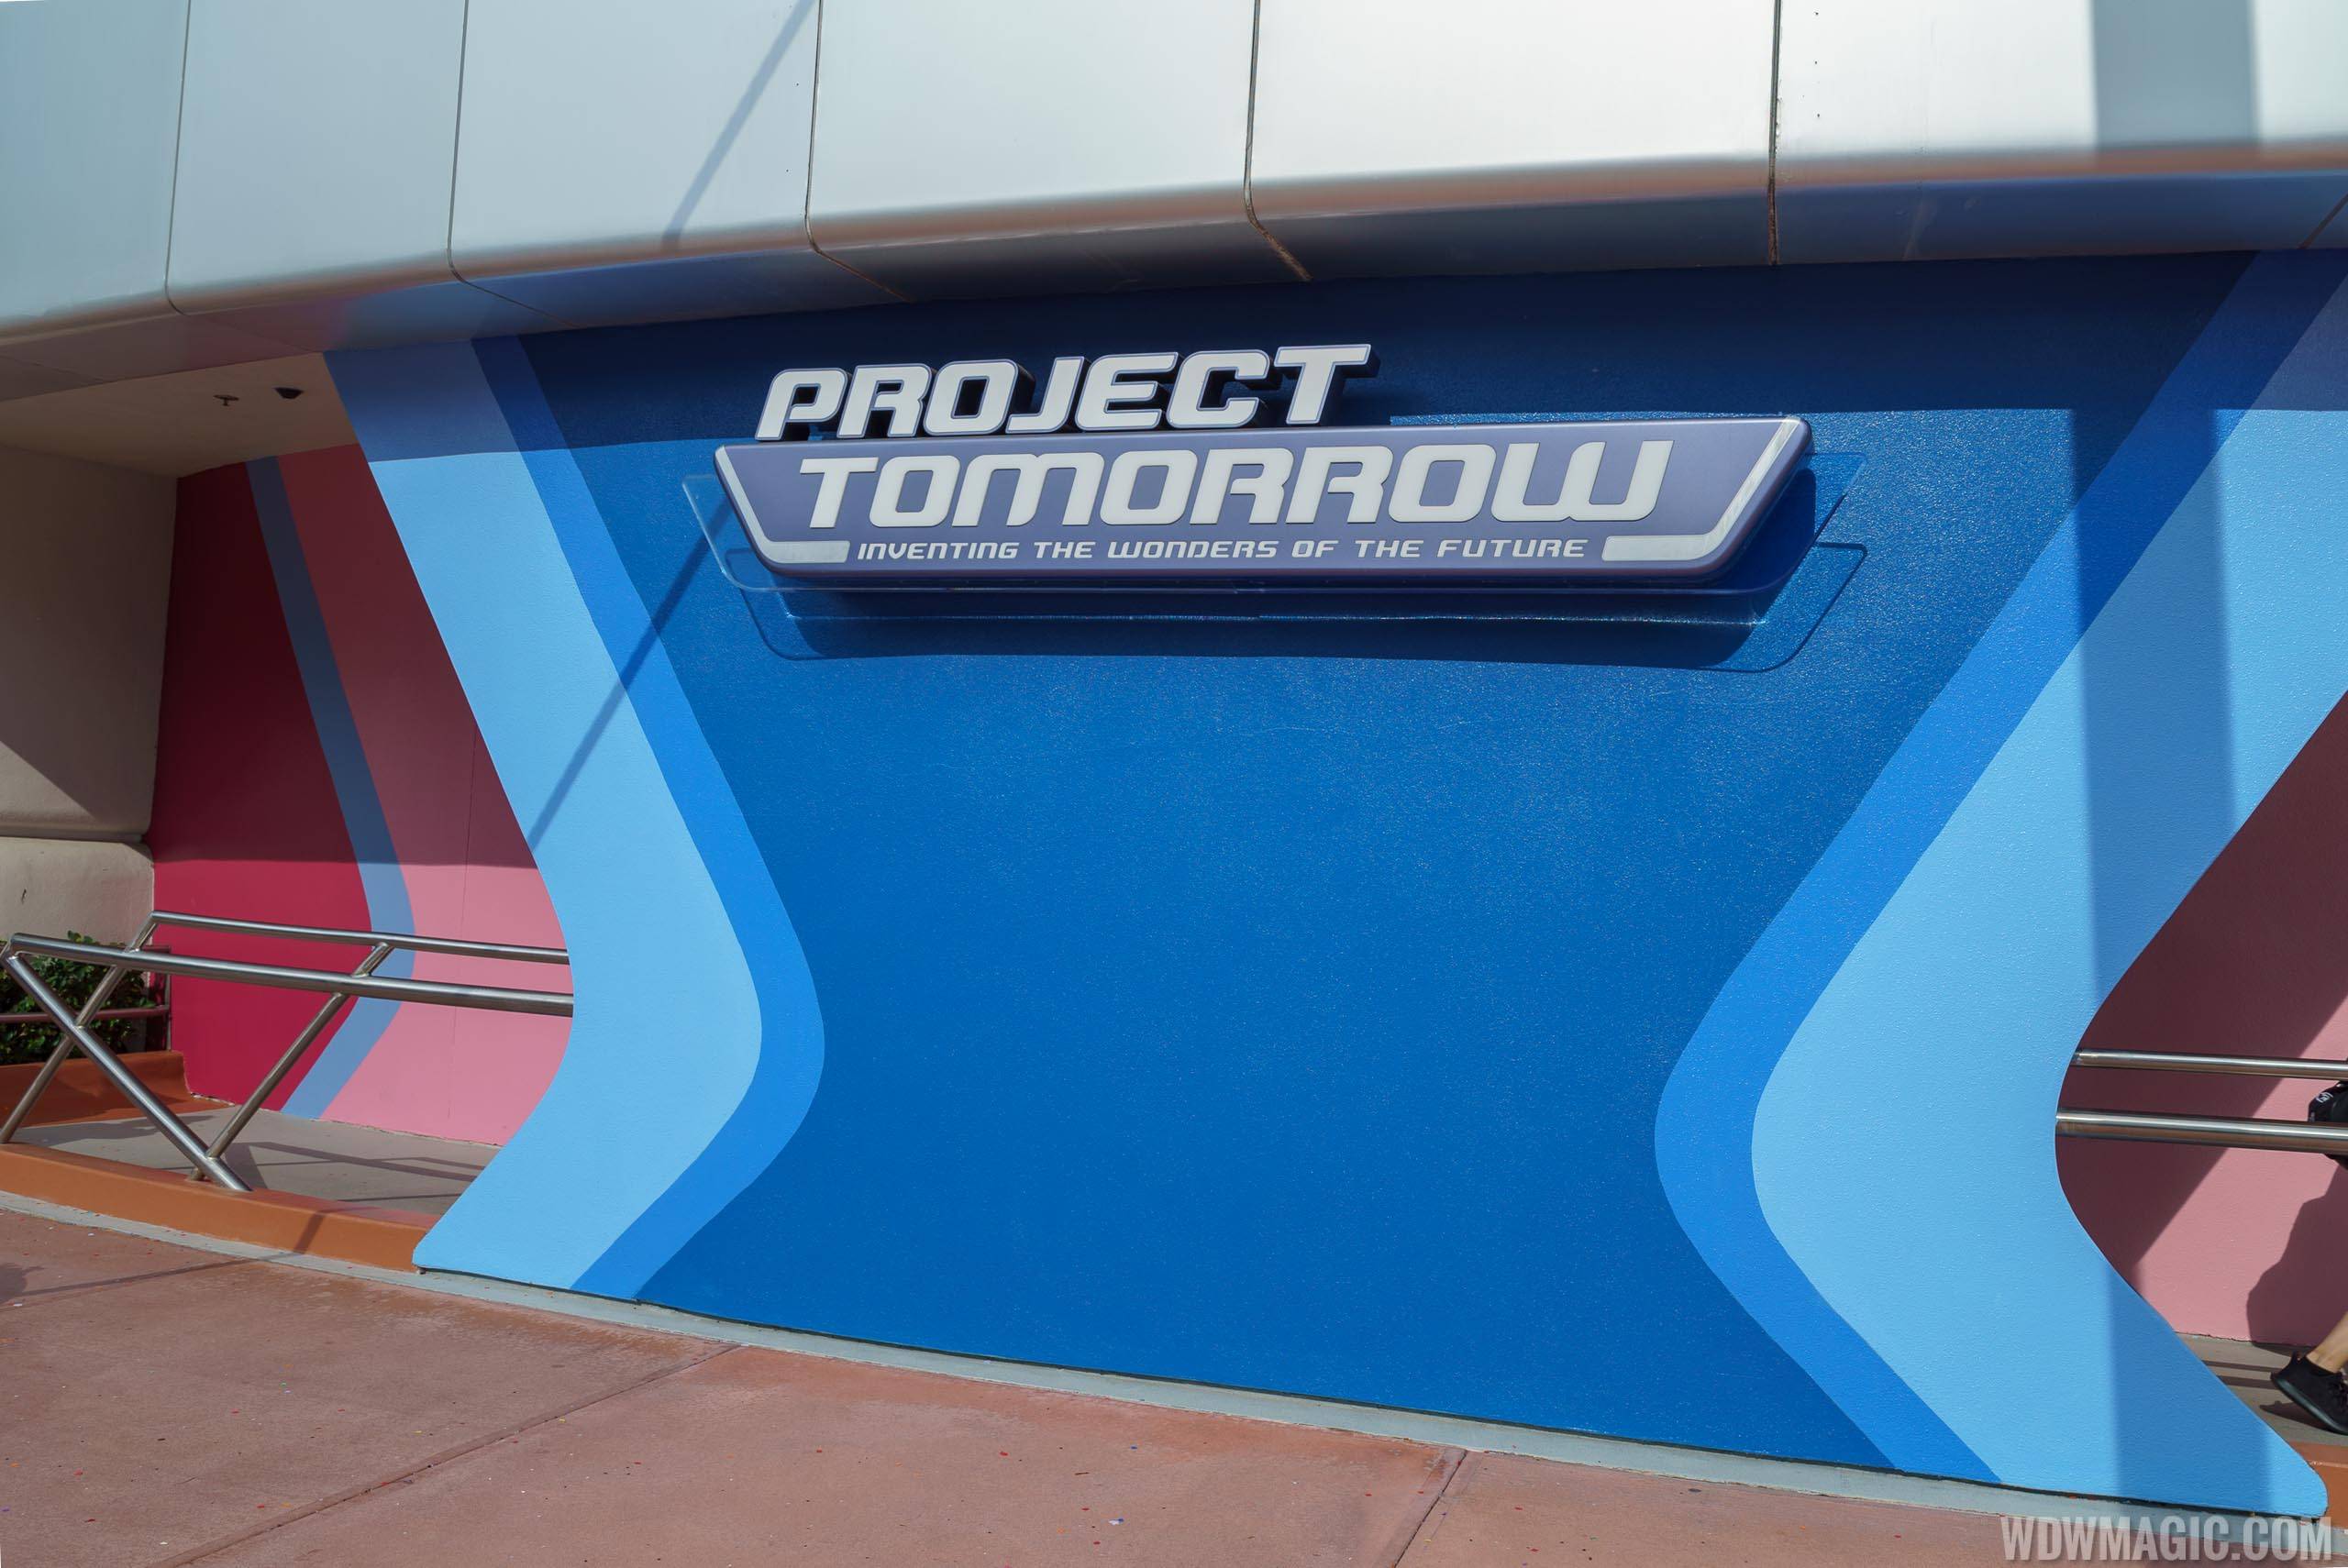 Siemens removed from the Project Tomorrow sign